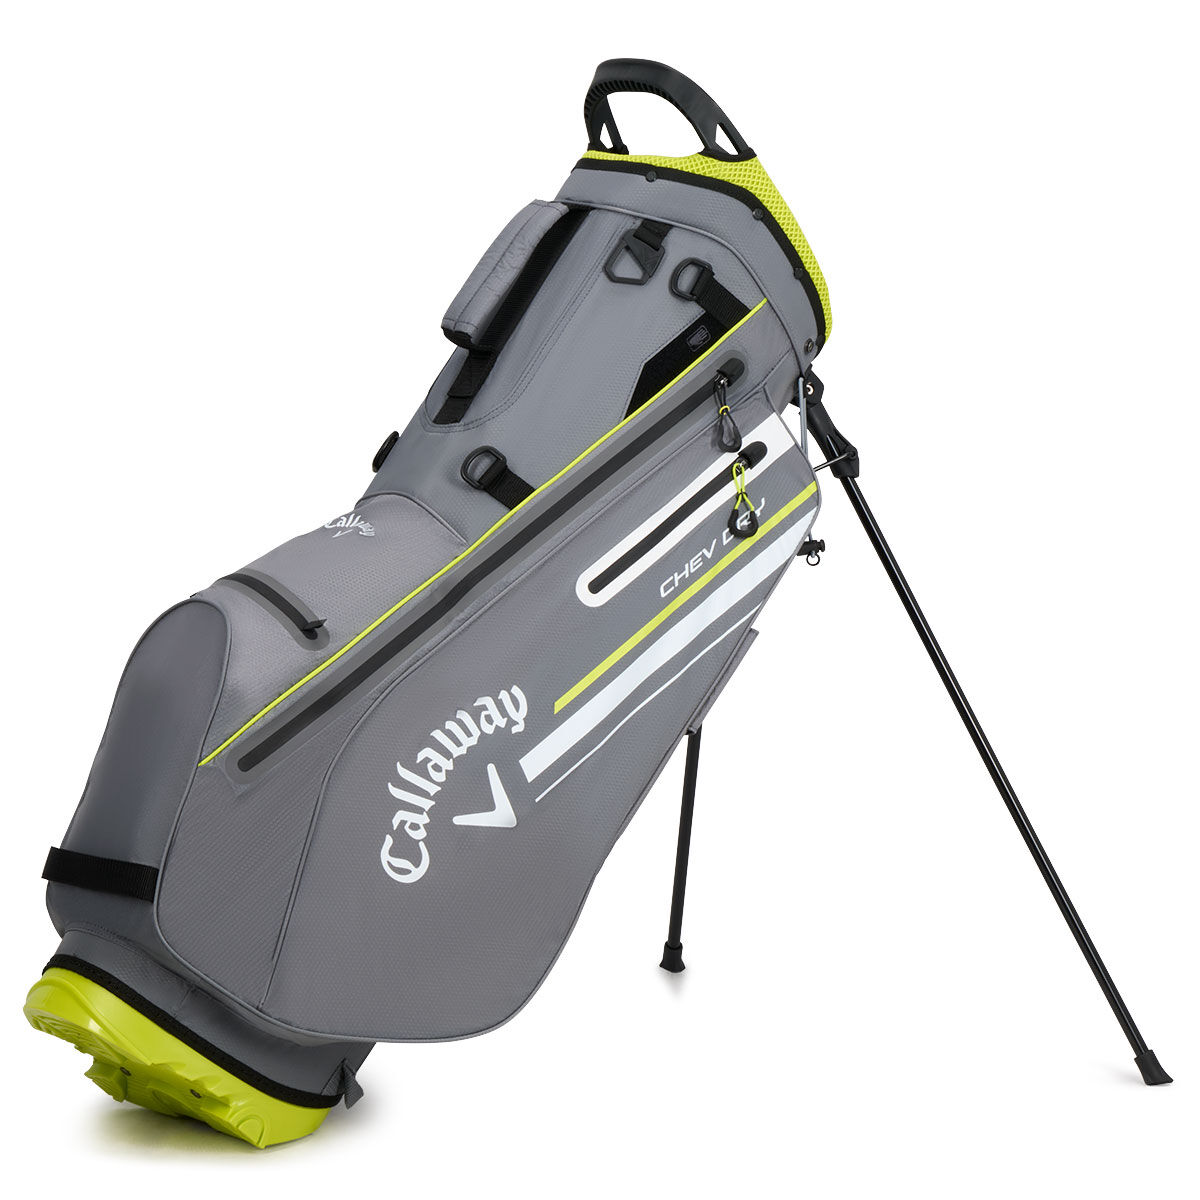 Callaway Golf Charcoal and Yellow Waterproof Chev Dry Golf Stand Bag | American Golf von Callaway Golf